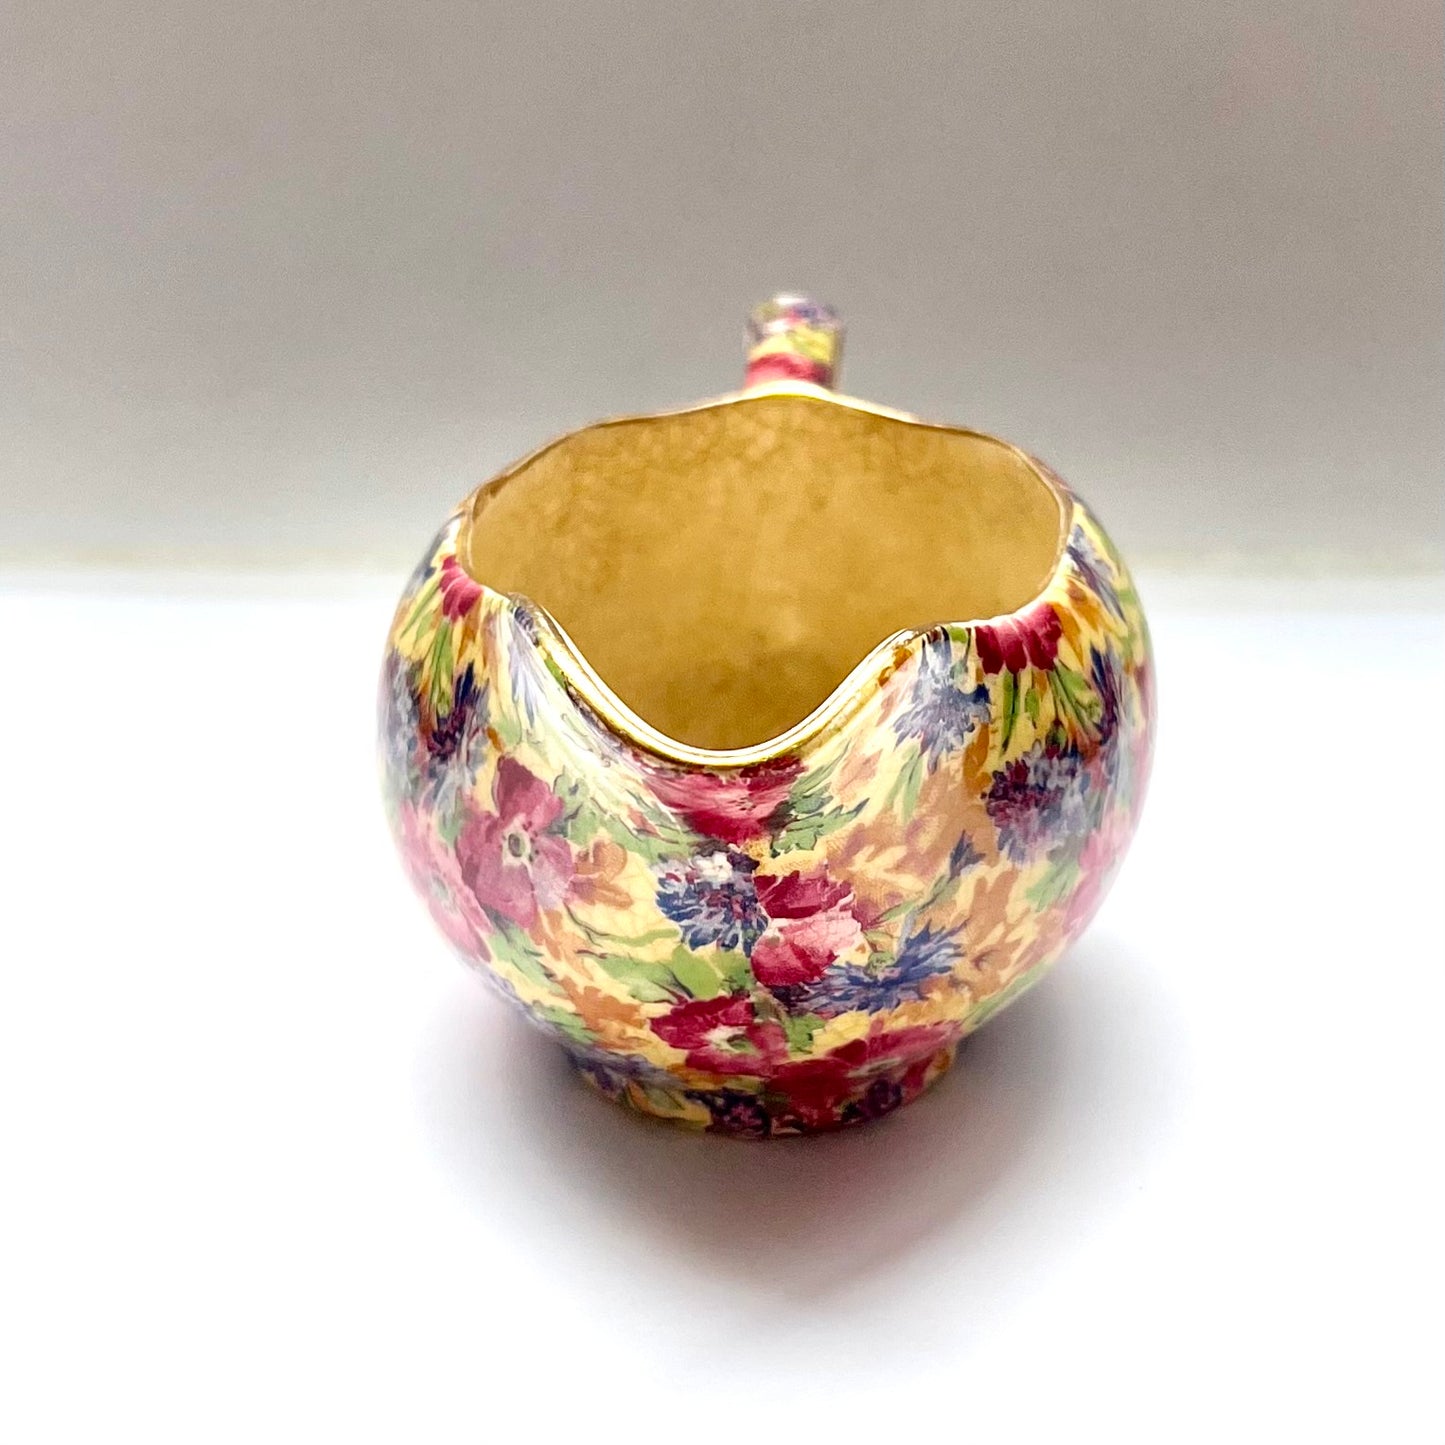 1930s to 1940s Royal Winton Grimwades Australia sauce boat in Royalty floral chintz pattern